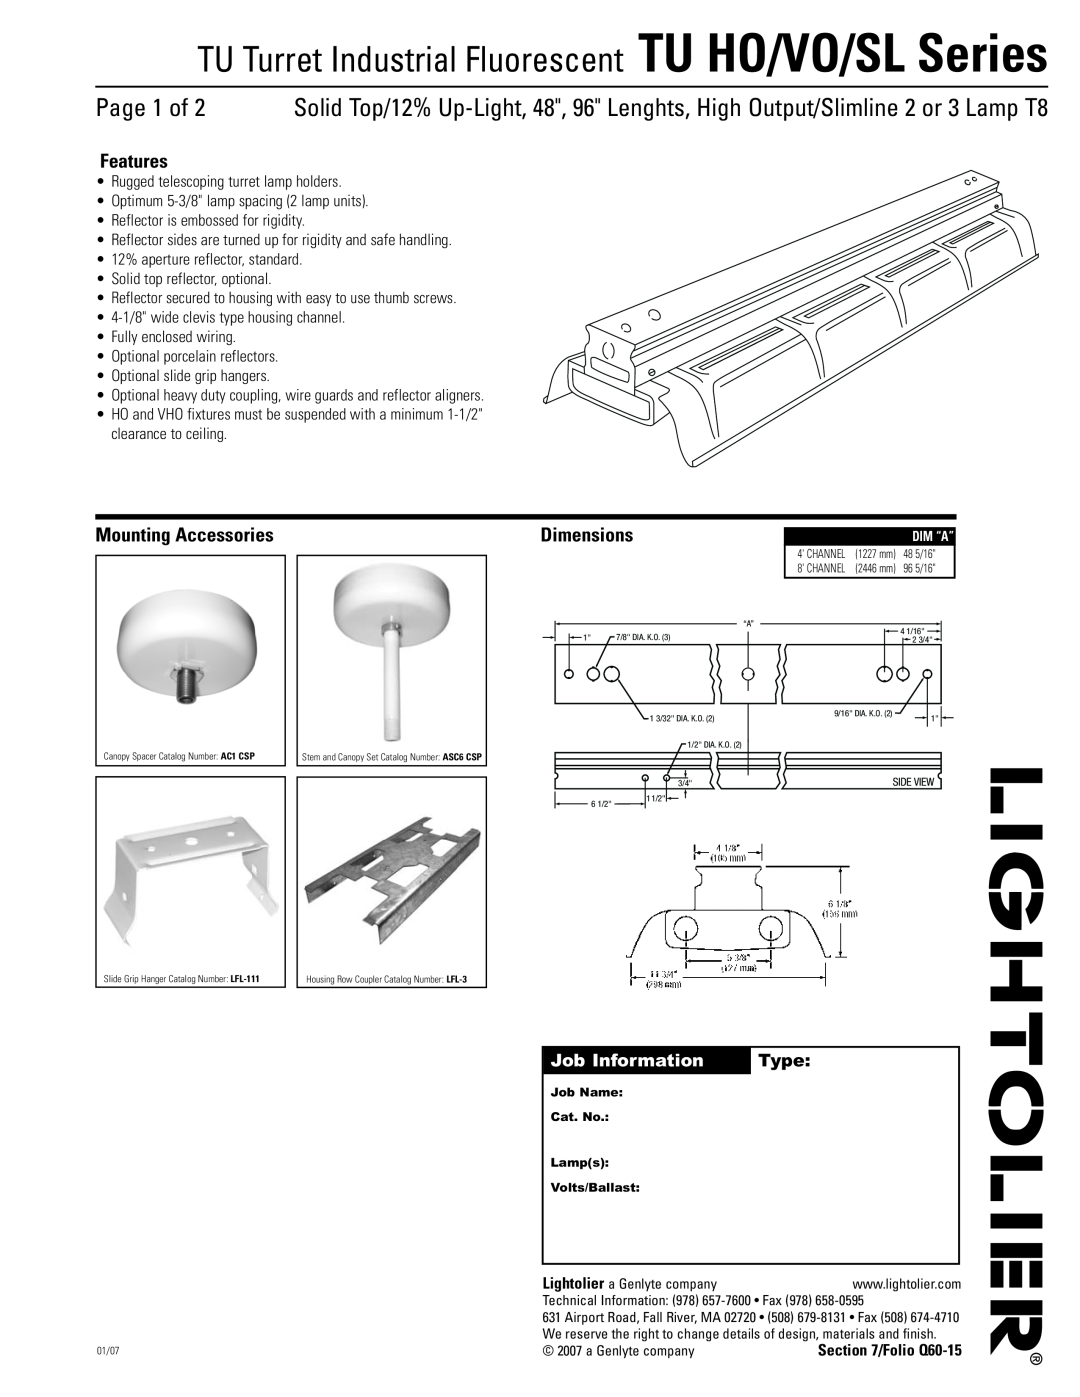 Lightolier TU VO Series, TU HO Series dimensions Features, Mounting Accessories, Job Information, Type, Dimensions 